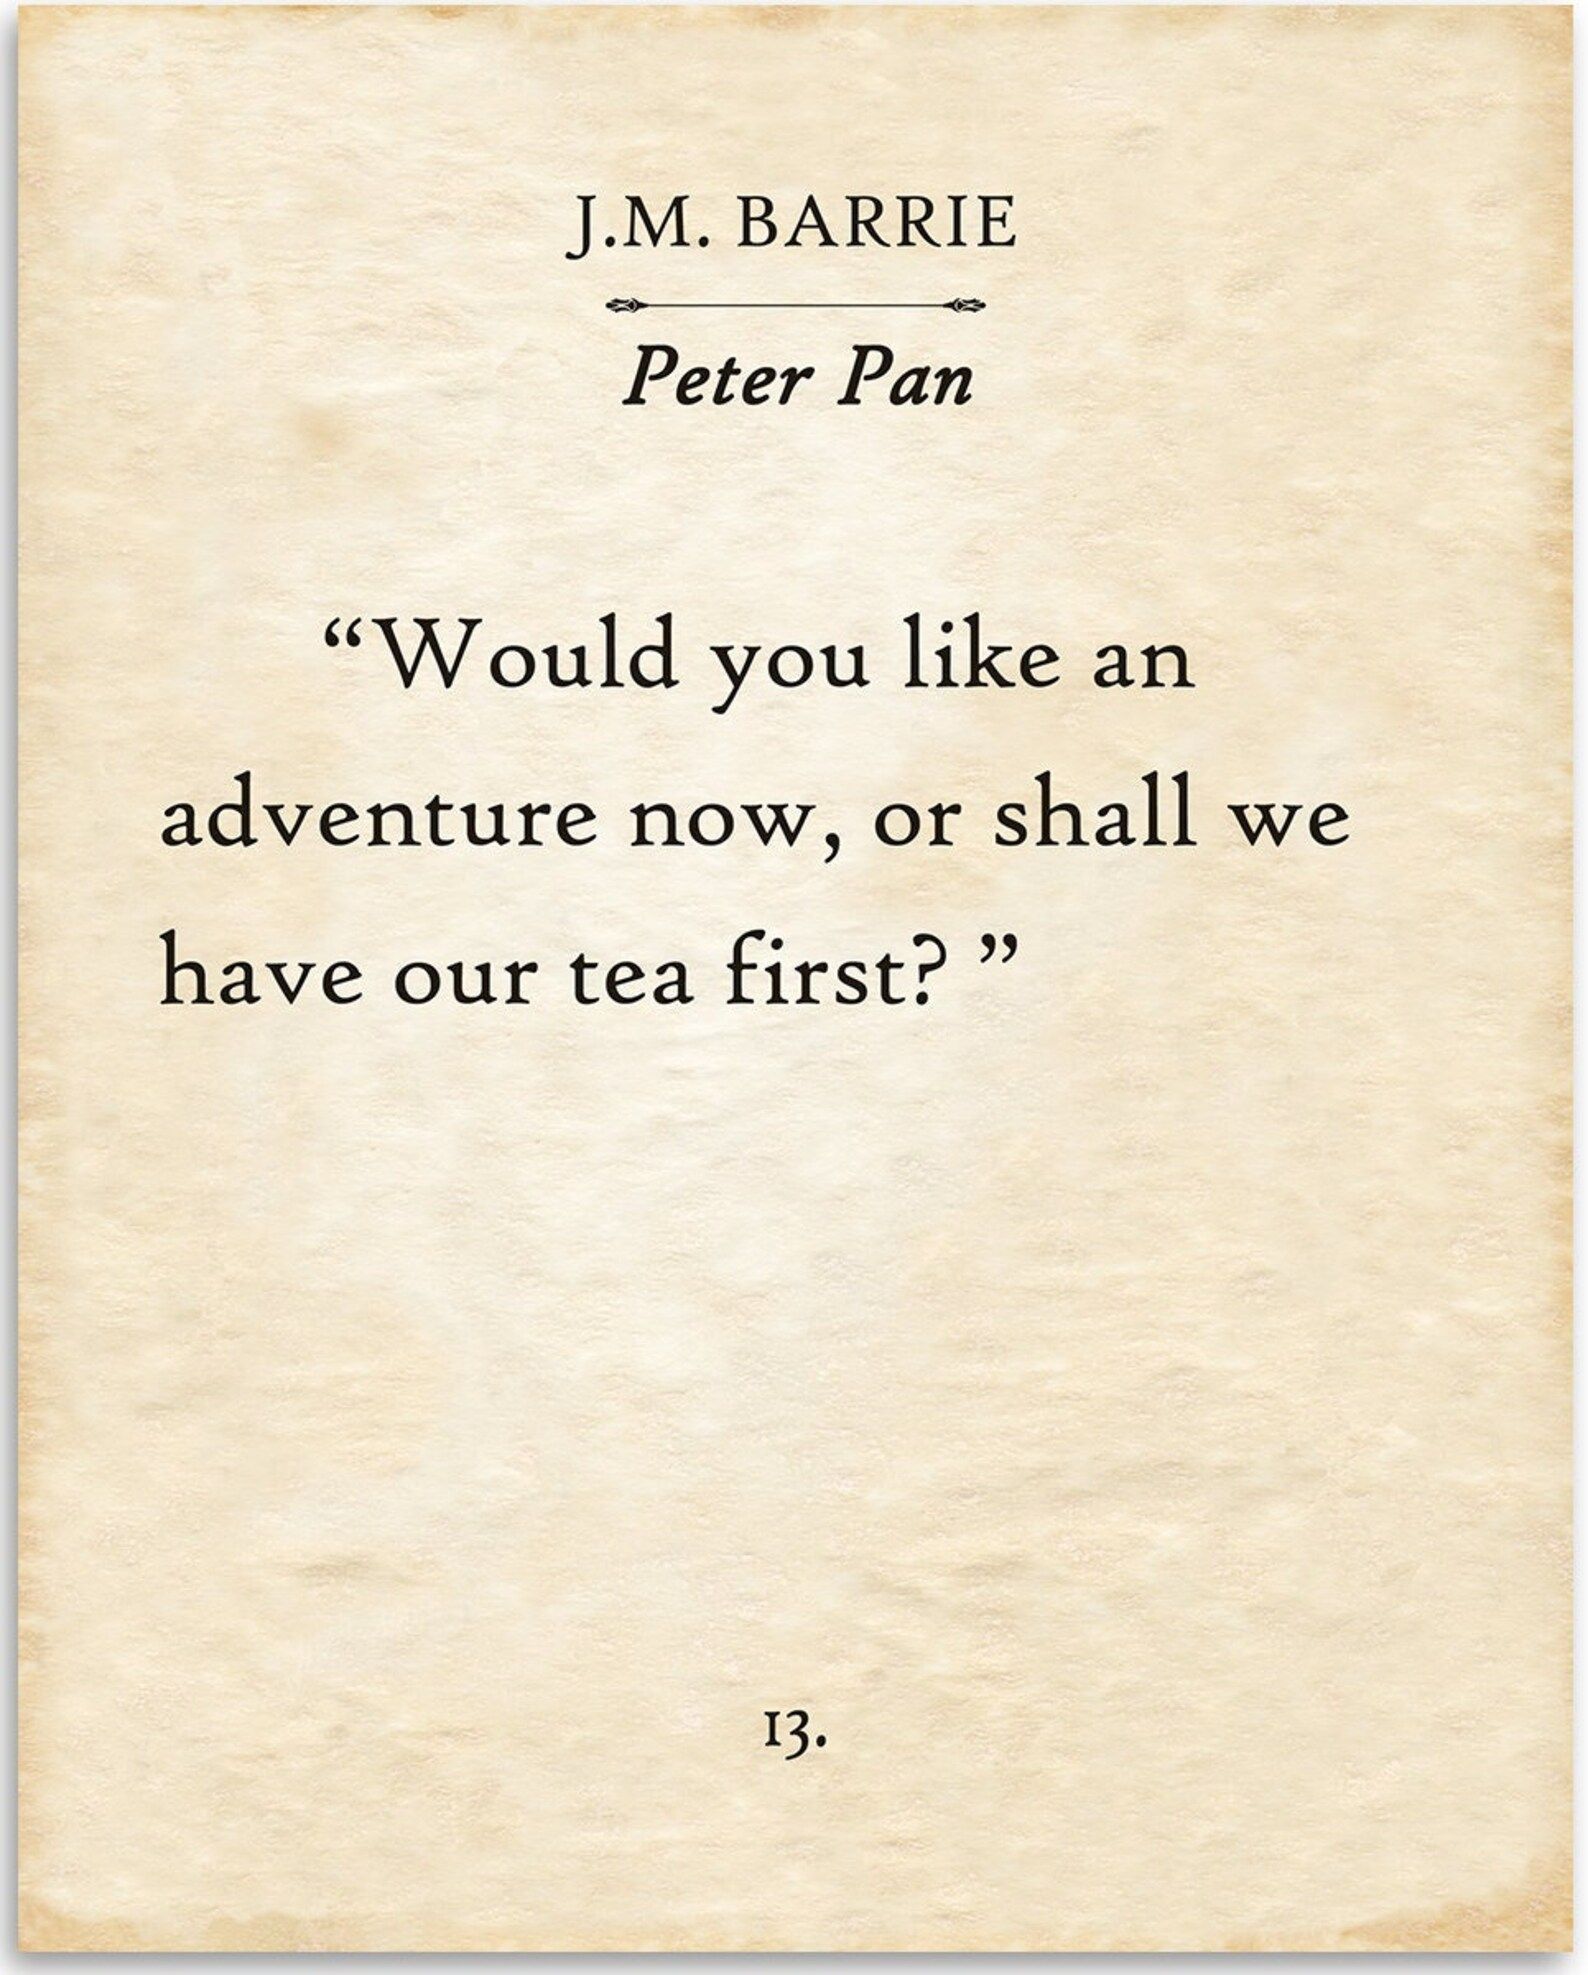 a print designed to look like a page from JM Barrie's Peter Pan that reads "Would you like an adventure now, or shall we have our tea first?"